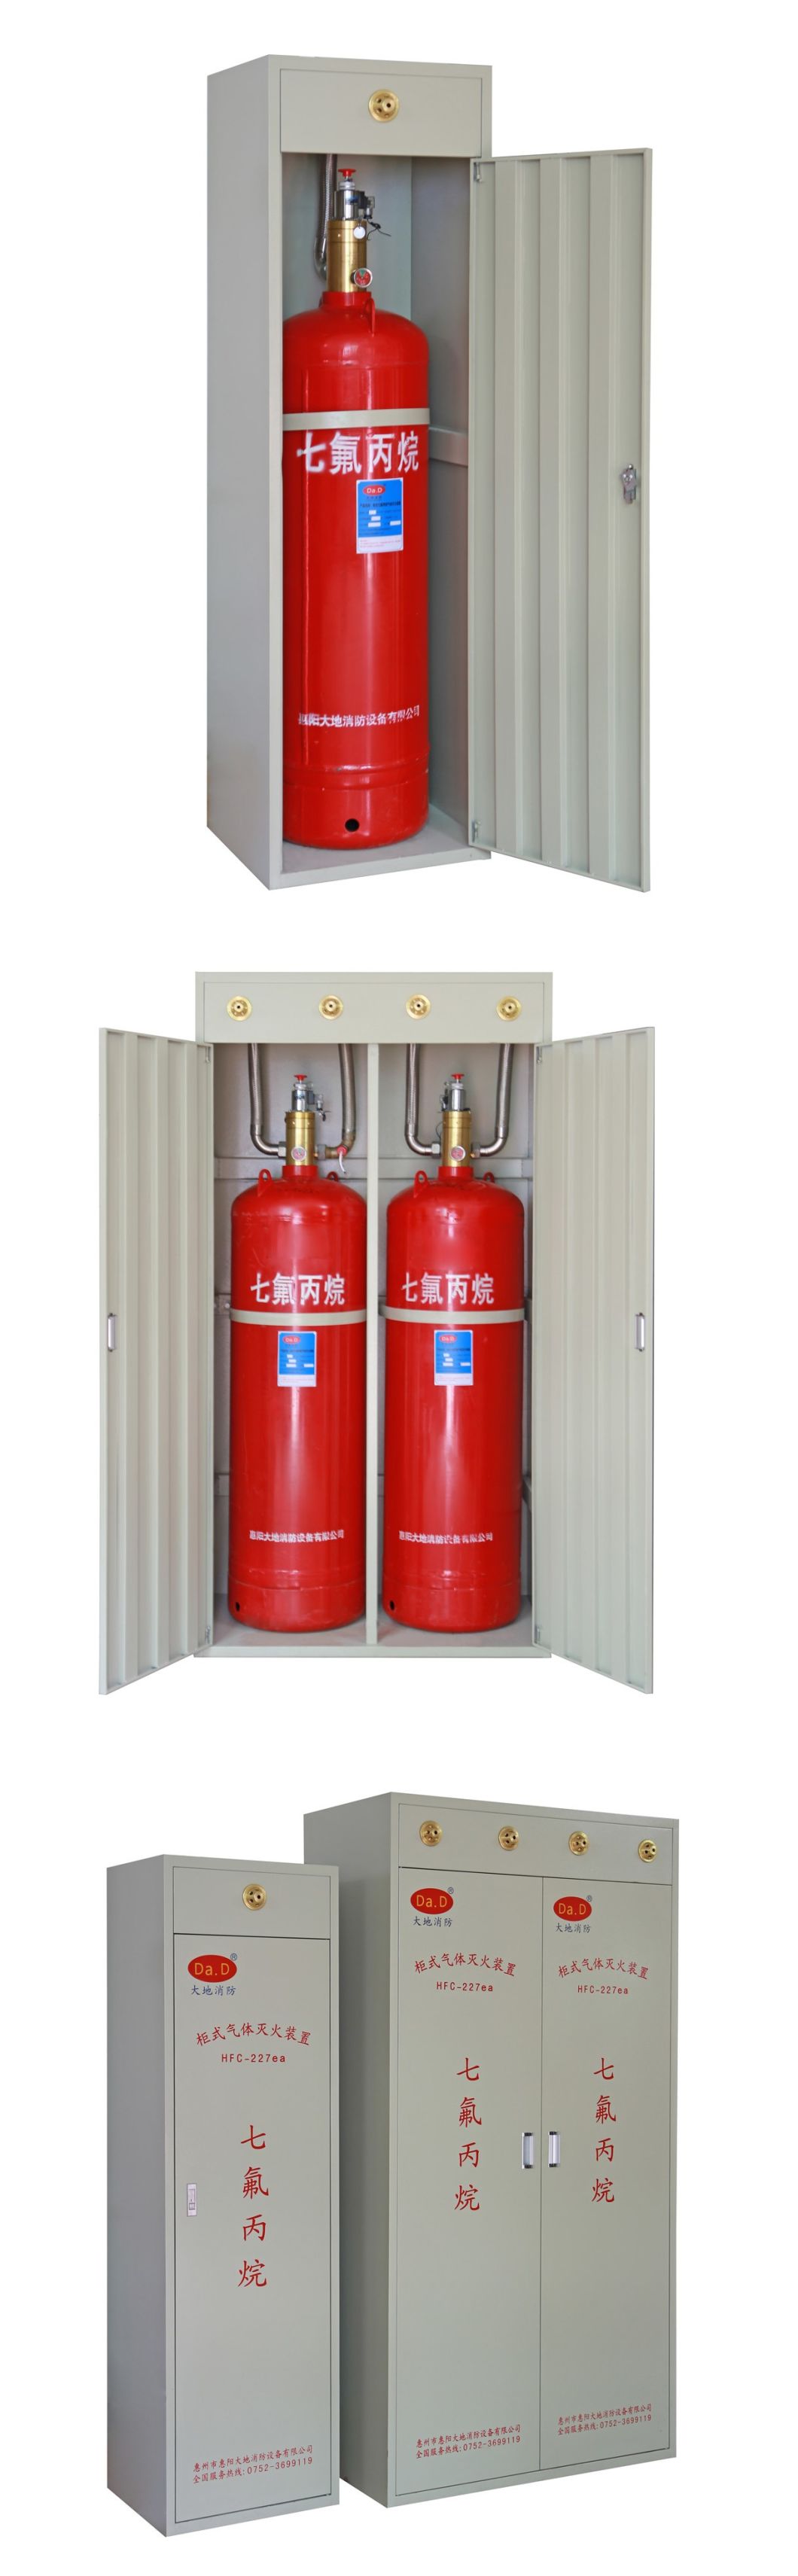 150L Cabinet FM200 Fire Suppression System Price for Communication Rooms